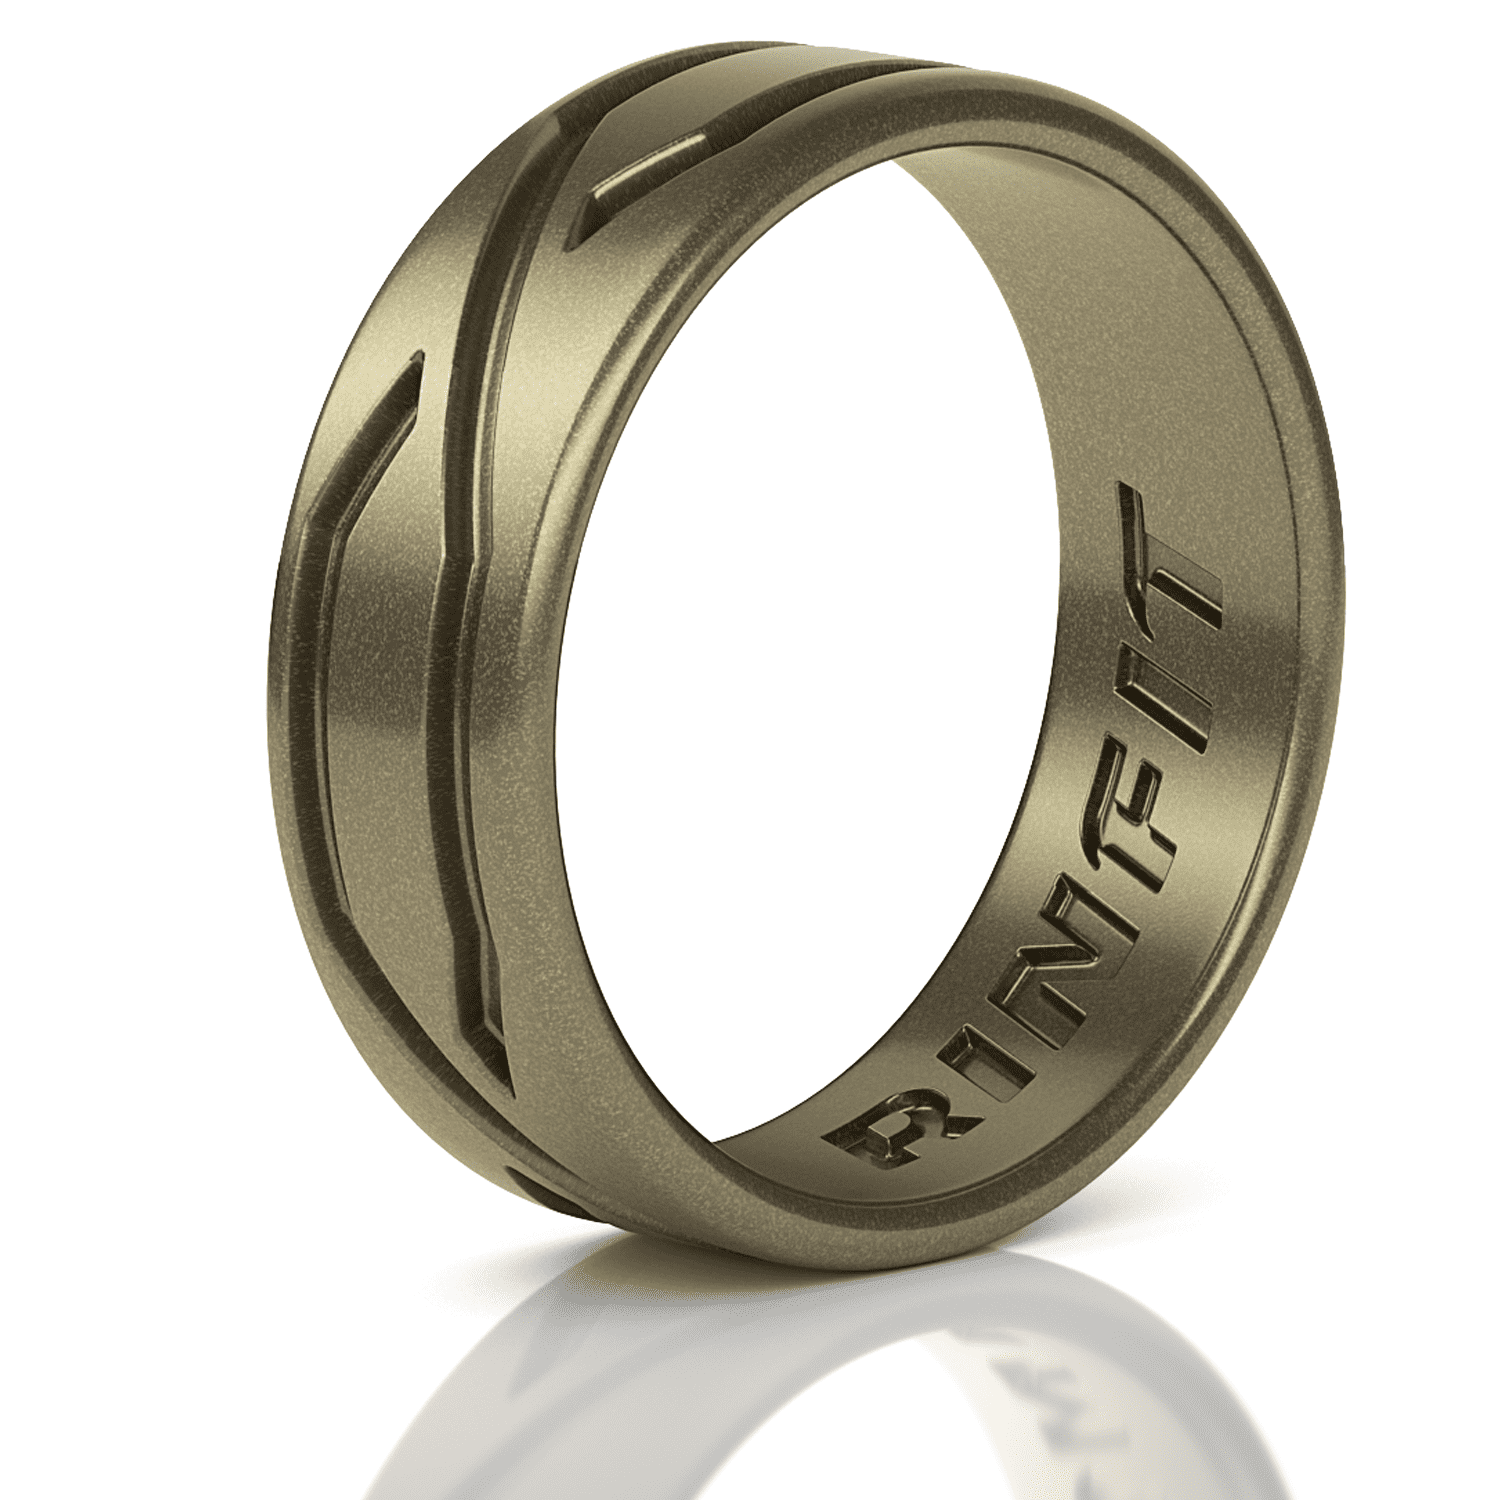 Rinfit Rinfit Silicone Wedding Ring for Women Metallic Bronze Color